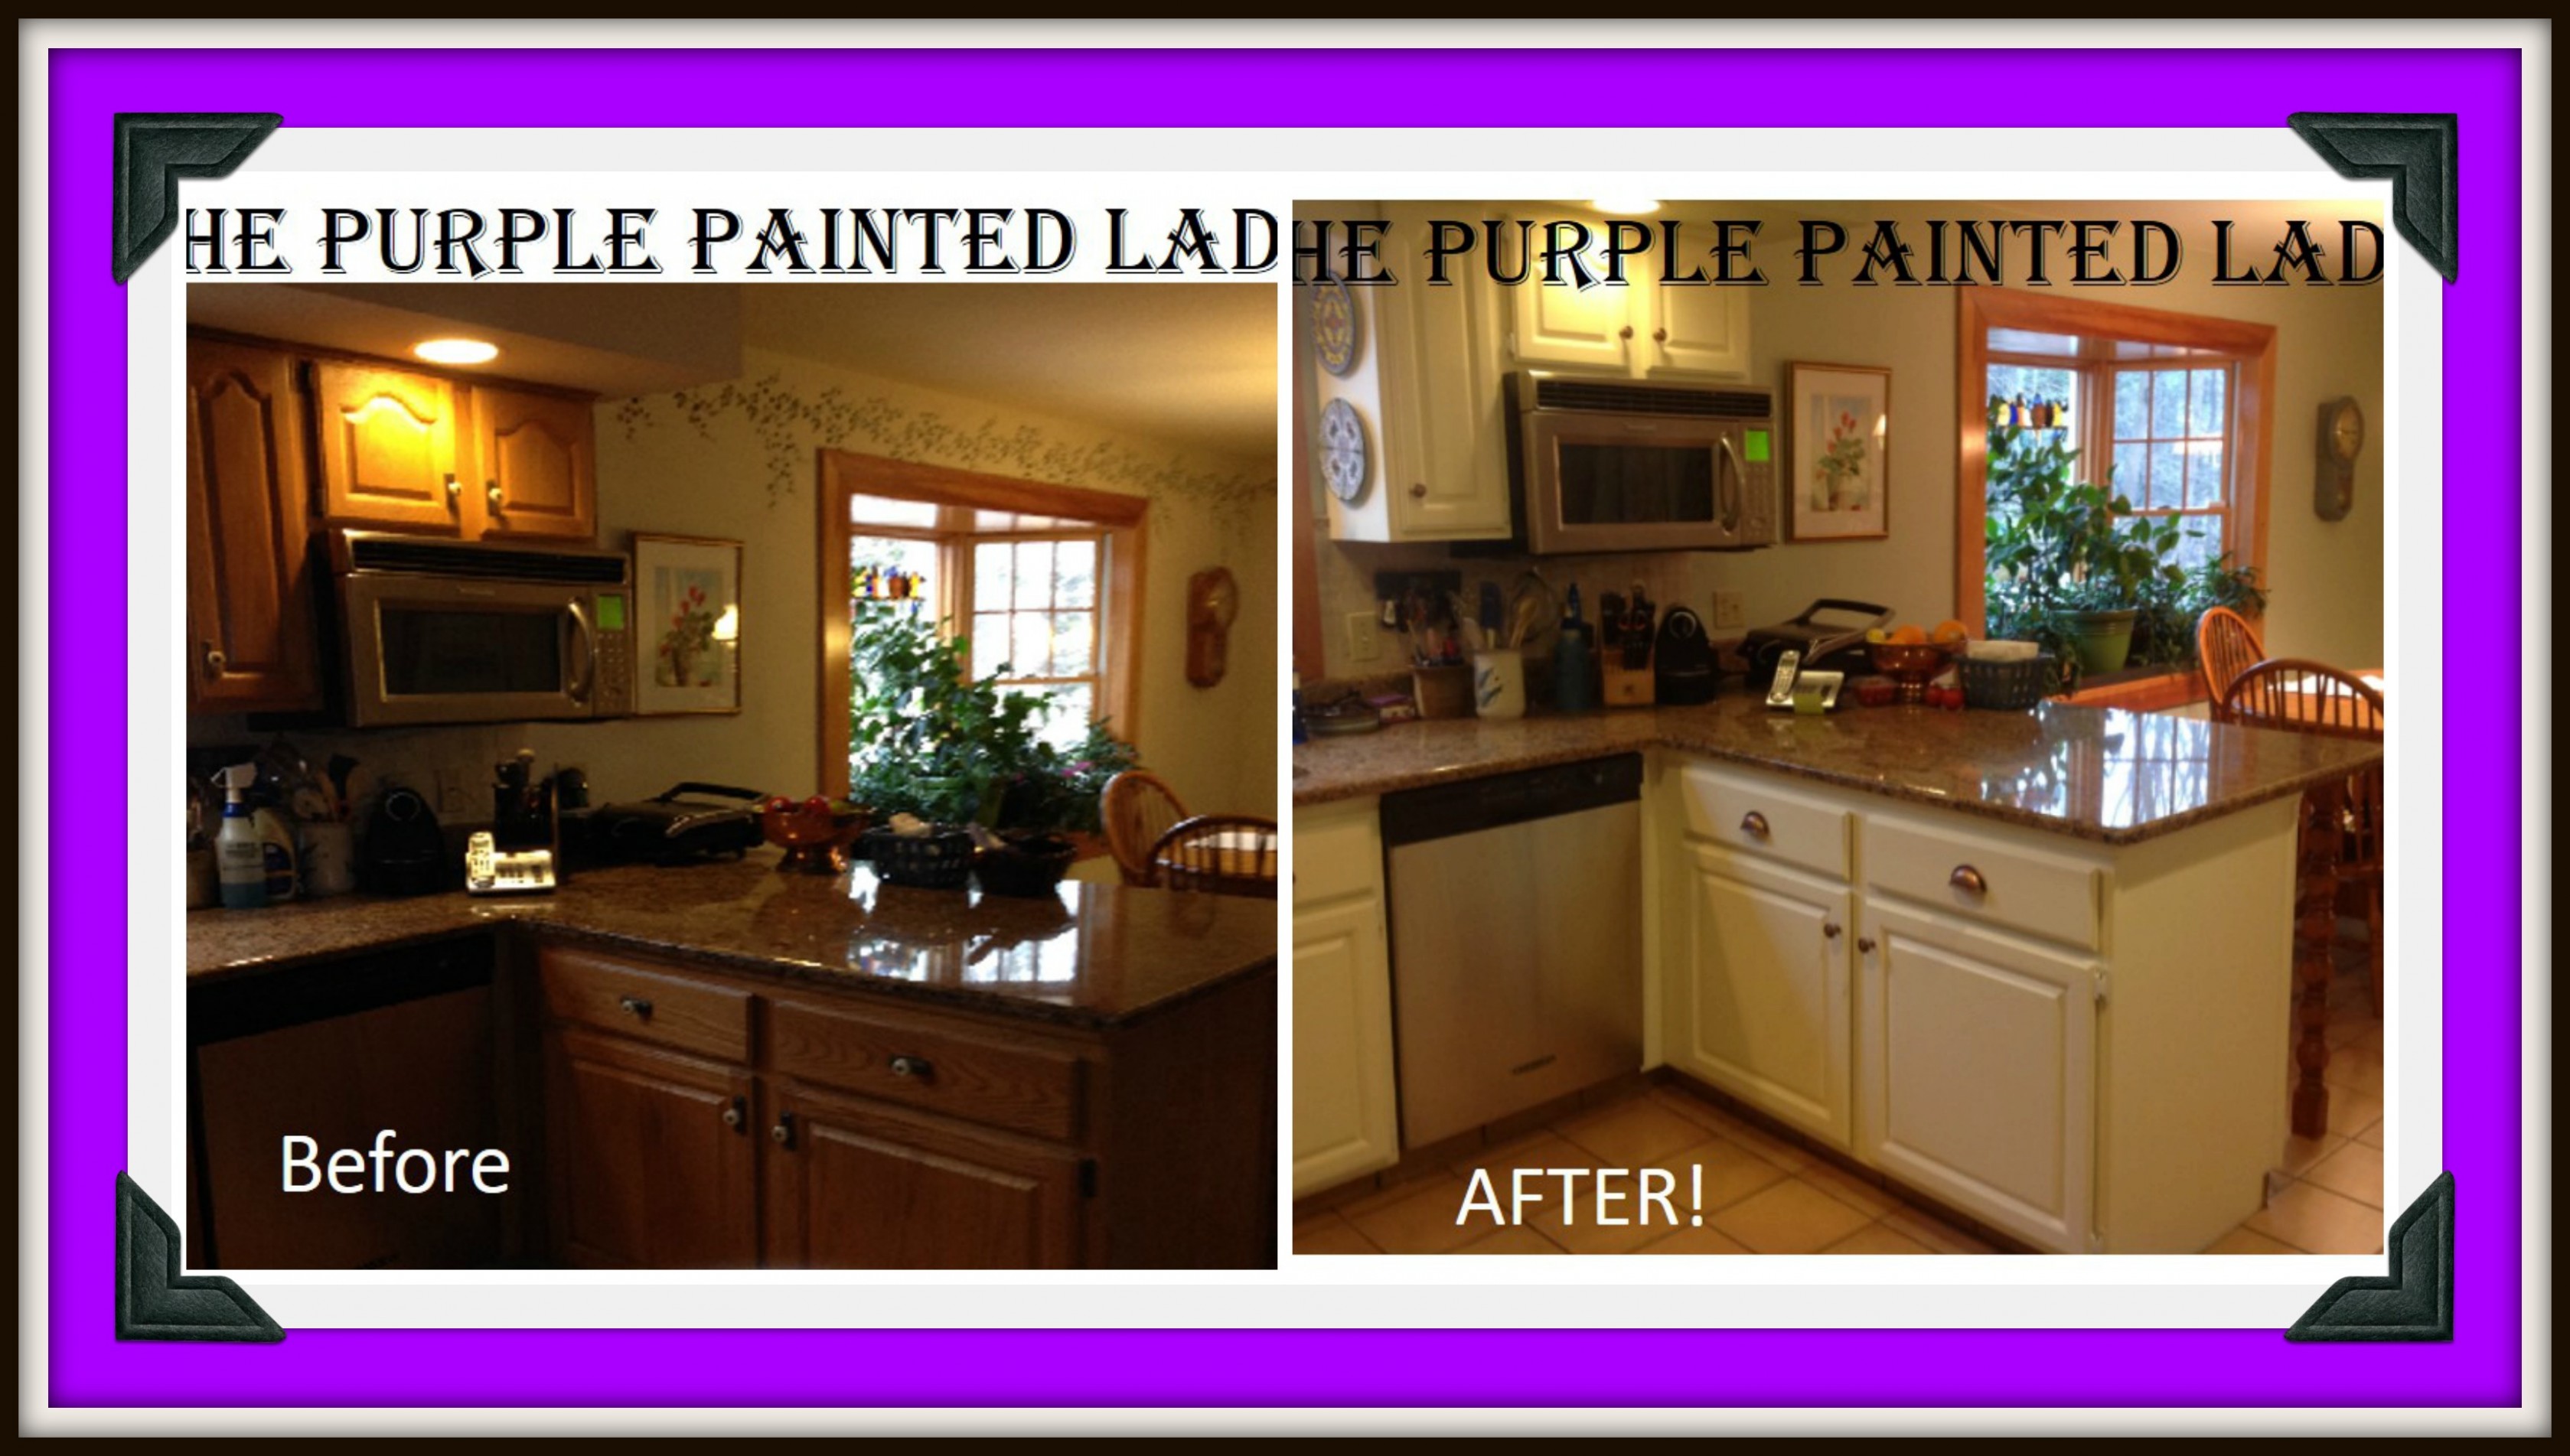 Do Your Kitchen Cabinets Look Tired? | The Purple Painted Lady Annie Sloan Chalk Paint Kitchen Table Ideas